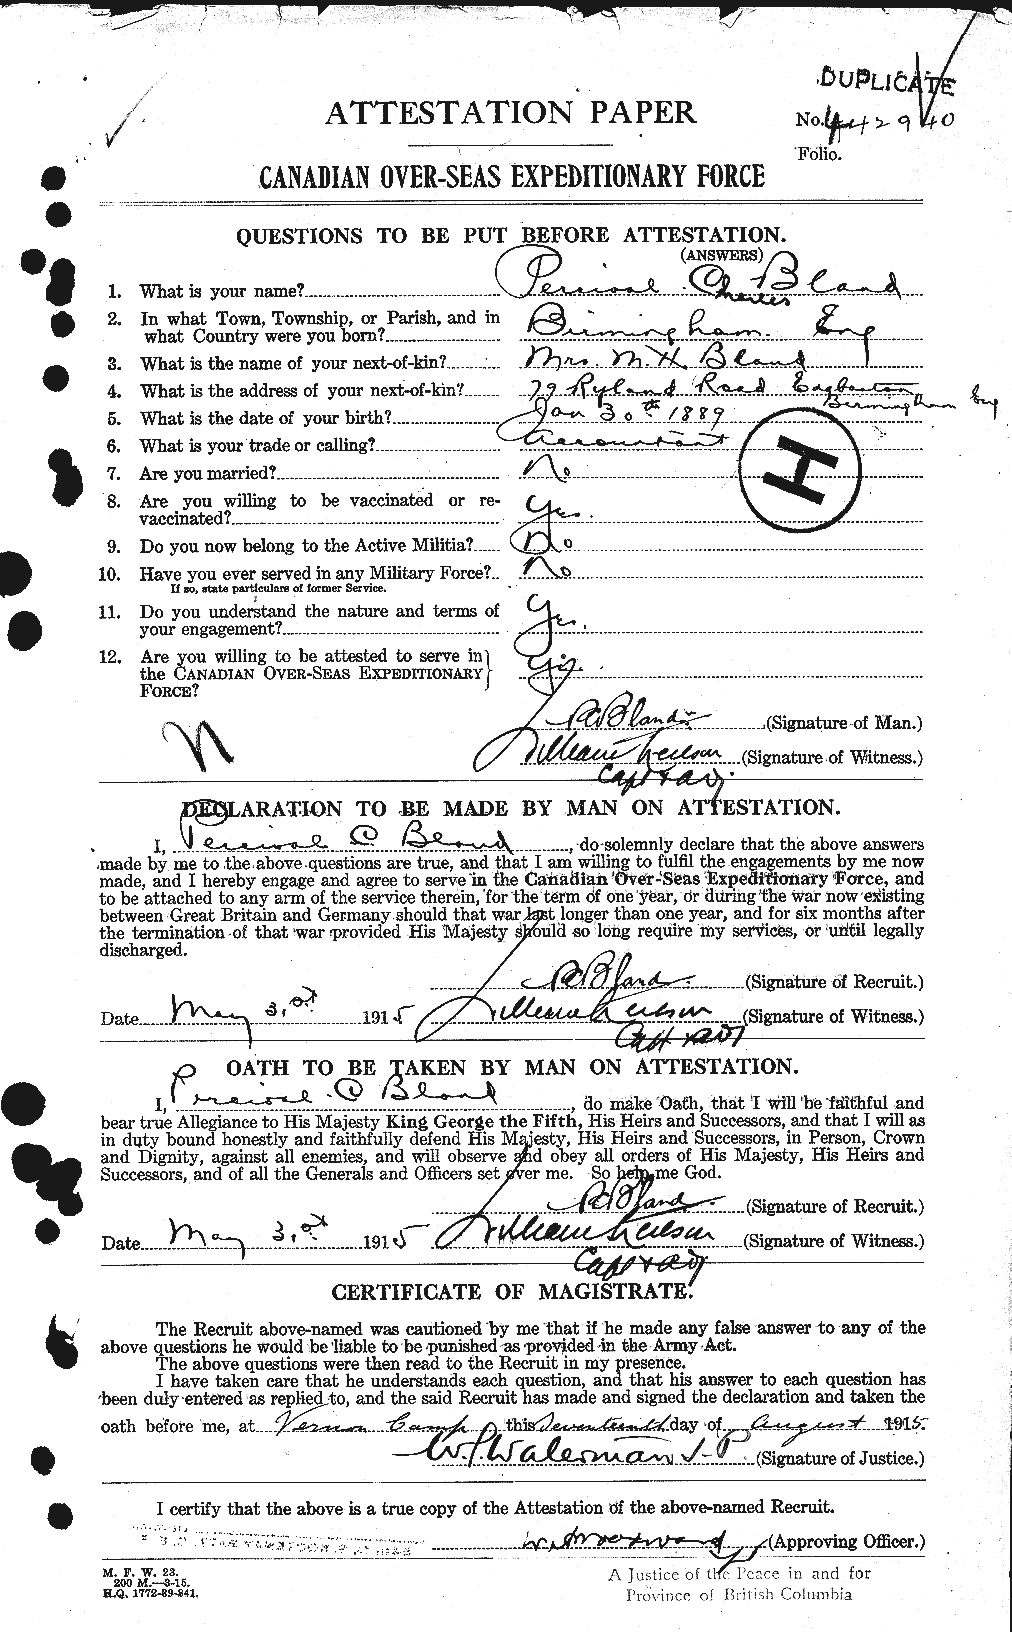 Personnel Records of the First World War - CEF 240656a